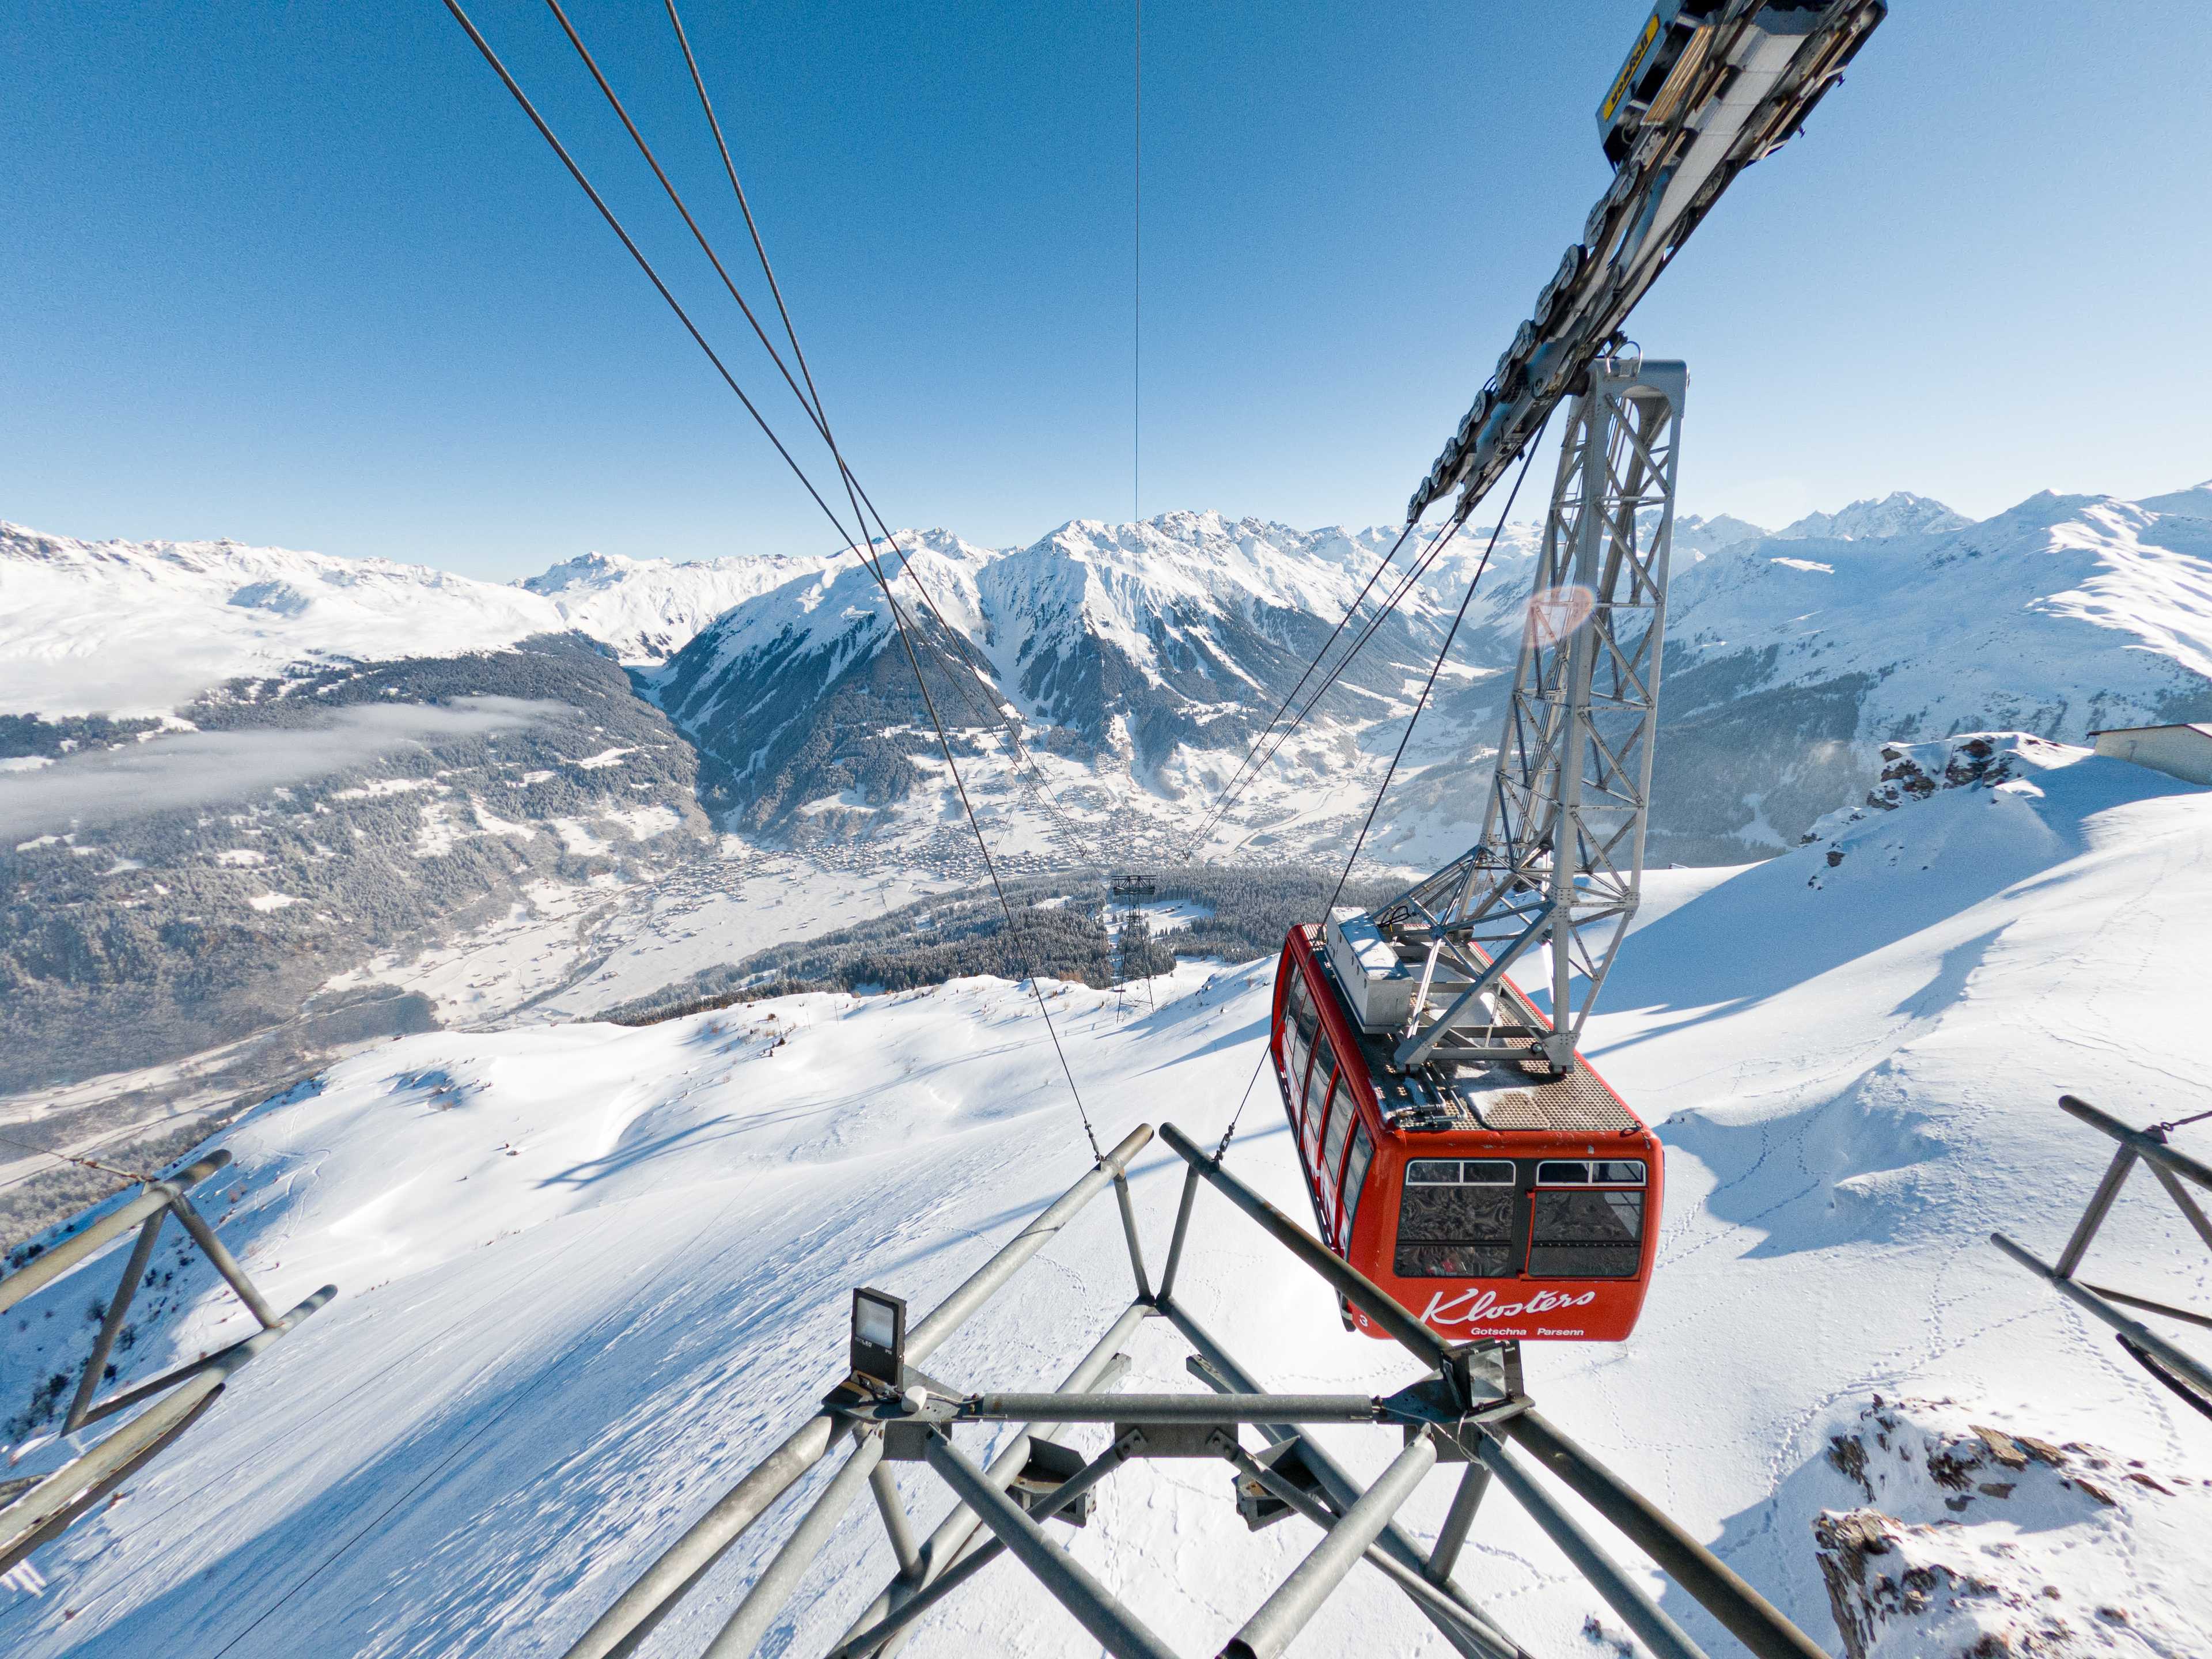 Klosters-Gotschna cable car